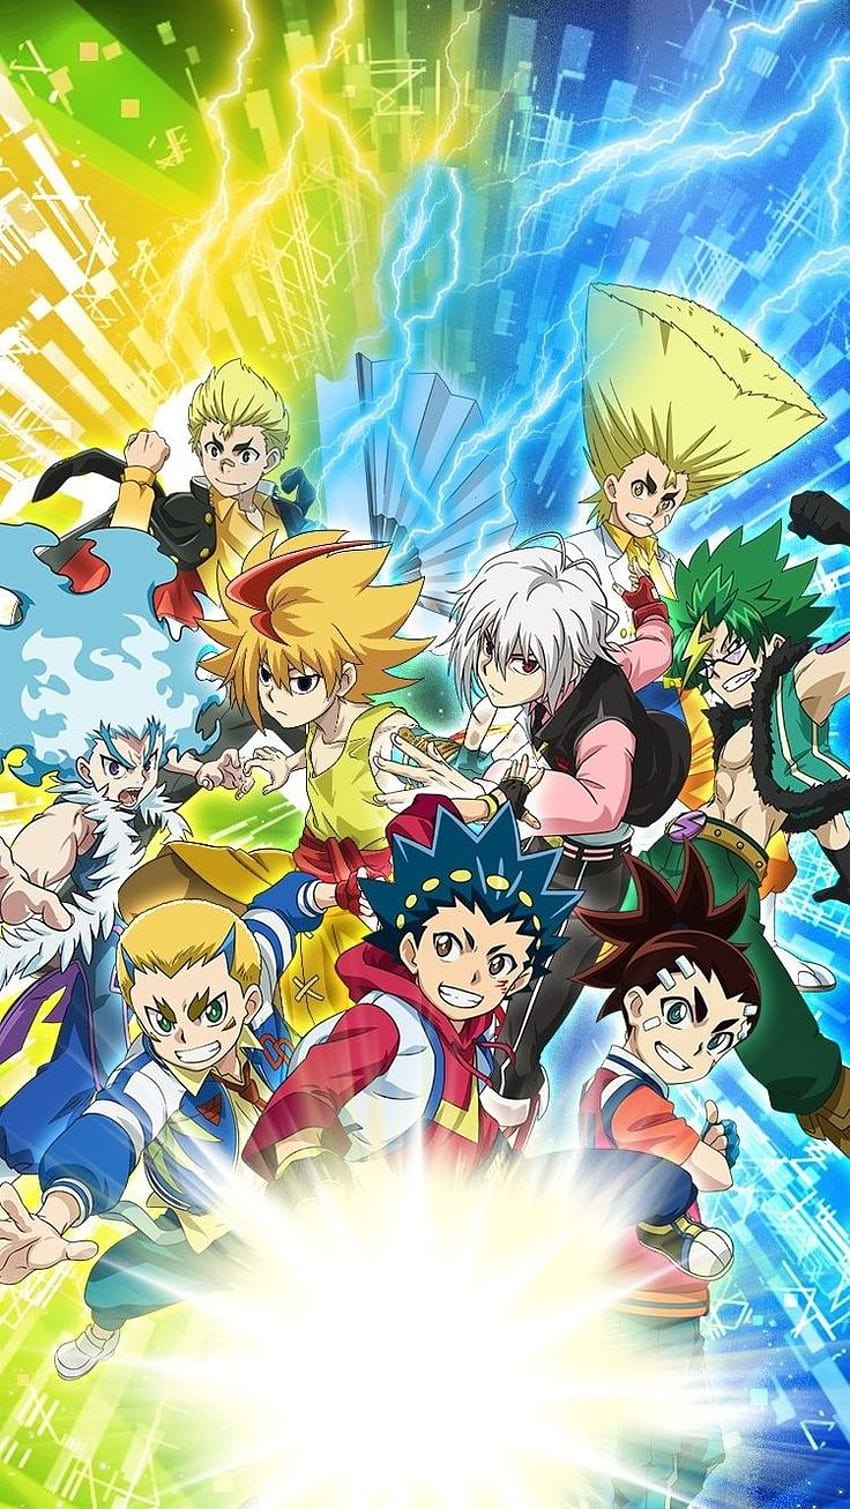 The poster with the 9 characters from the 4 seasons of Beyblade Burst who will appear in season 5/Sparking is now complete…, beyblade burst turbo logo HD phone wallpaper